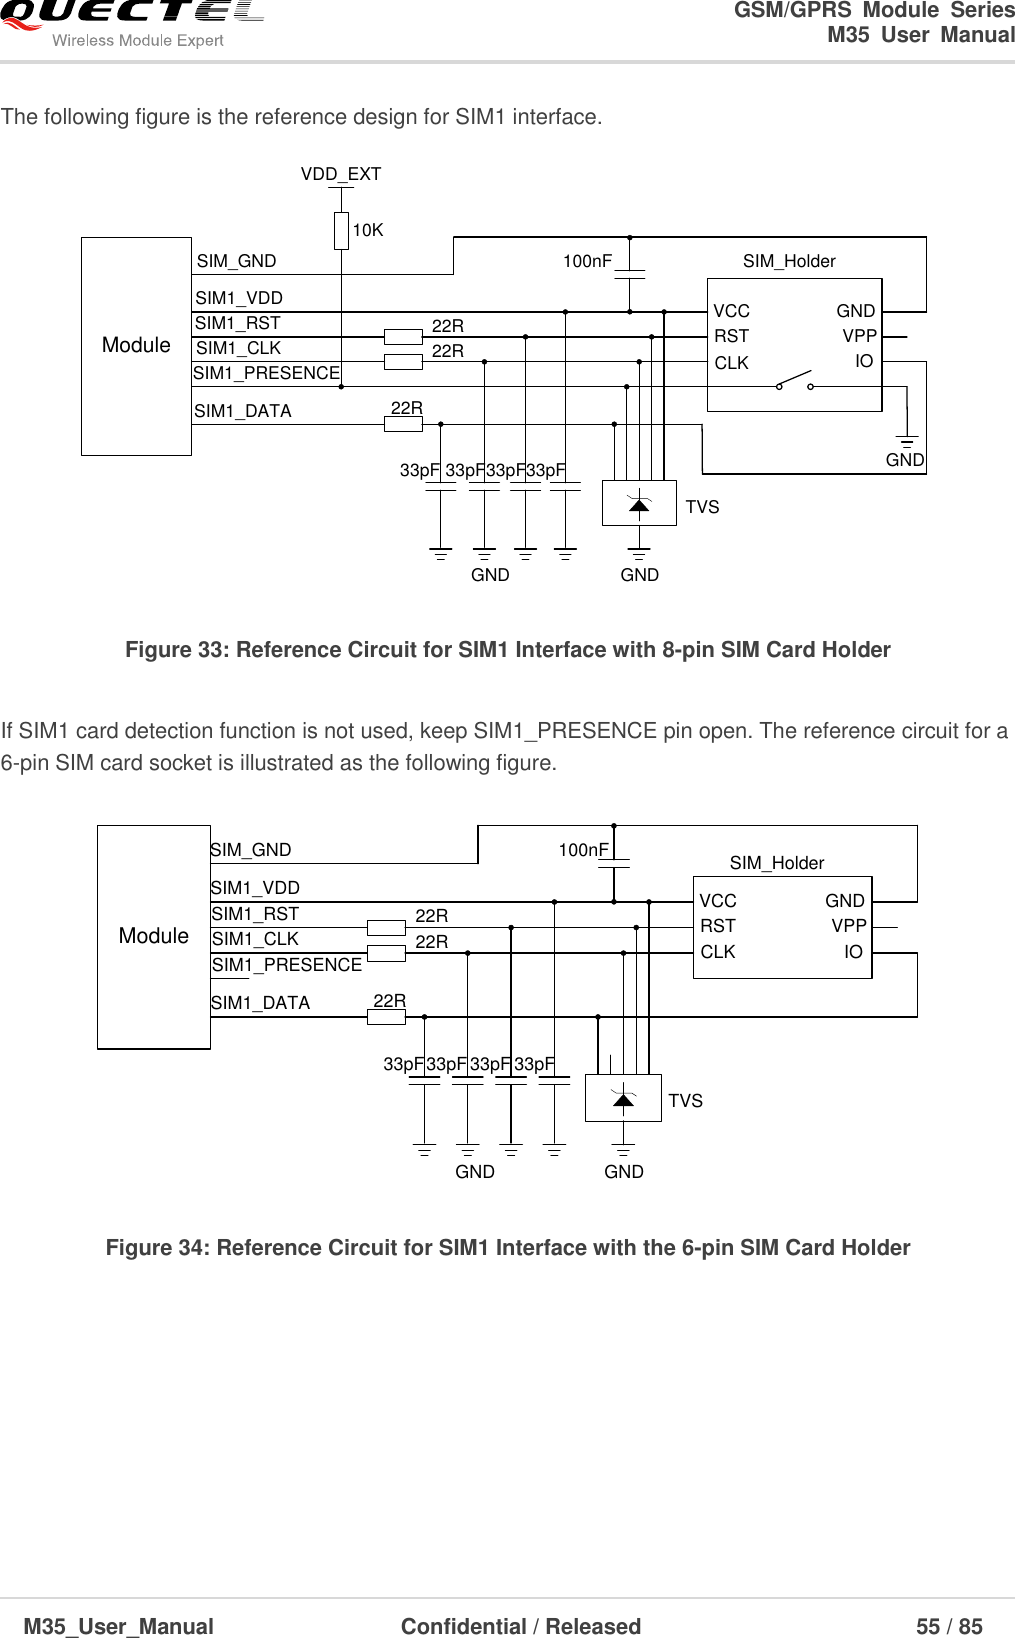                                                                              GSM/GPRS  Module  Series                                                                 M35  User  Manual  M35_User_Manual                                  Confidential / Released                             55 / 85    The following figure is the reference design for SIM1 interface. VDD_EXTModuleSIM1_VDDSIM_GNDSIM1_RSTSIM1_CLKSIM1_DATASIM1_PRESENCE22R22R22R10K100nF SIM_HolderGNDGNDTVS33pF33pF 33pF33pFVCCRSTCLK IOVPPGNDGND Figure 33: Reference Circuit for SIM1 Interface with 8-pin SIM Card Holder  If SIM1 card detection function is not used, keep SIM1_PRESENCE pin open. The reference circuit for a 6-pin SIM card socket is illustrated as the following figure.  ModuleSIM1_VDDSIM_GNDSIM1_RSTSIM1_CLKSIM1_DATASIM1_PRESENCE22R22R22R100nF SIM_HolderGNDTVS33pF33pF 33pFVCCRSTCLK IOVPPGNDGND33pF Figure 34: Reference Circuit for SIM1 Interface with the 6-pin SIM Card Holder         